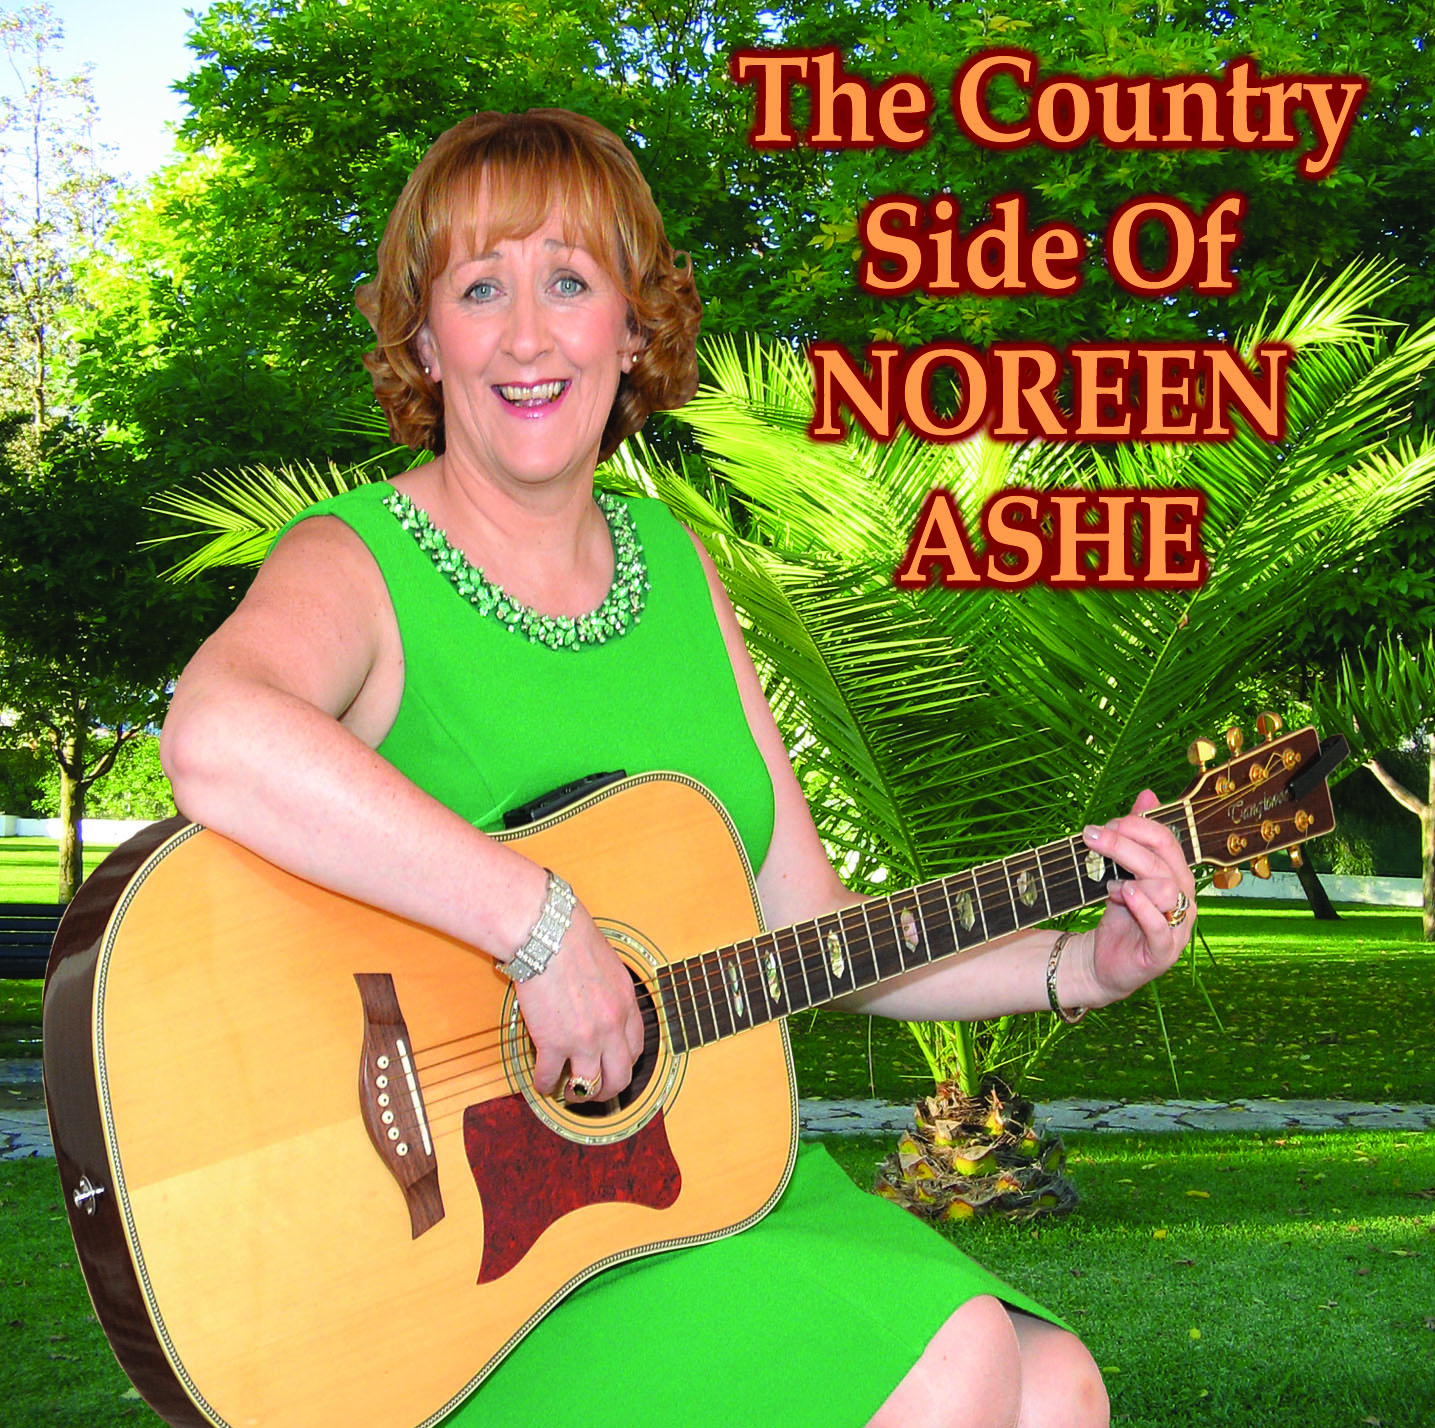 The Country Side of Noreen Ashe Album Cover